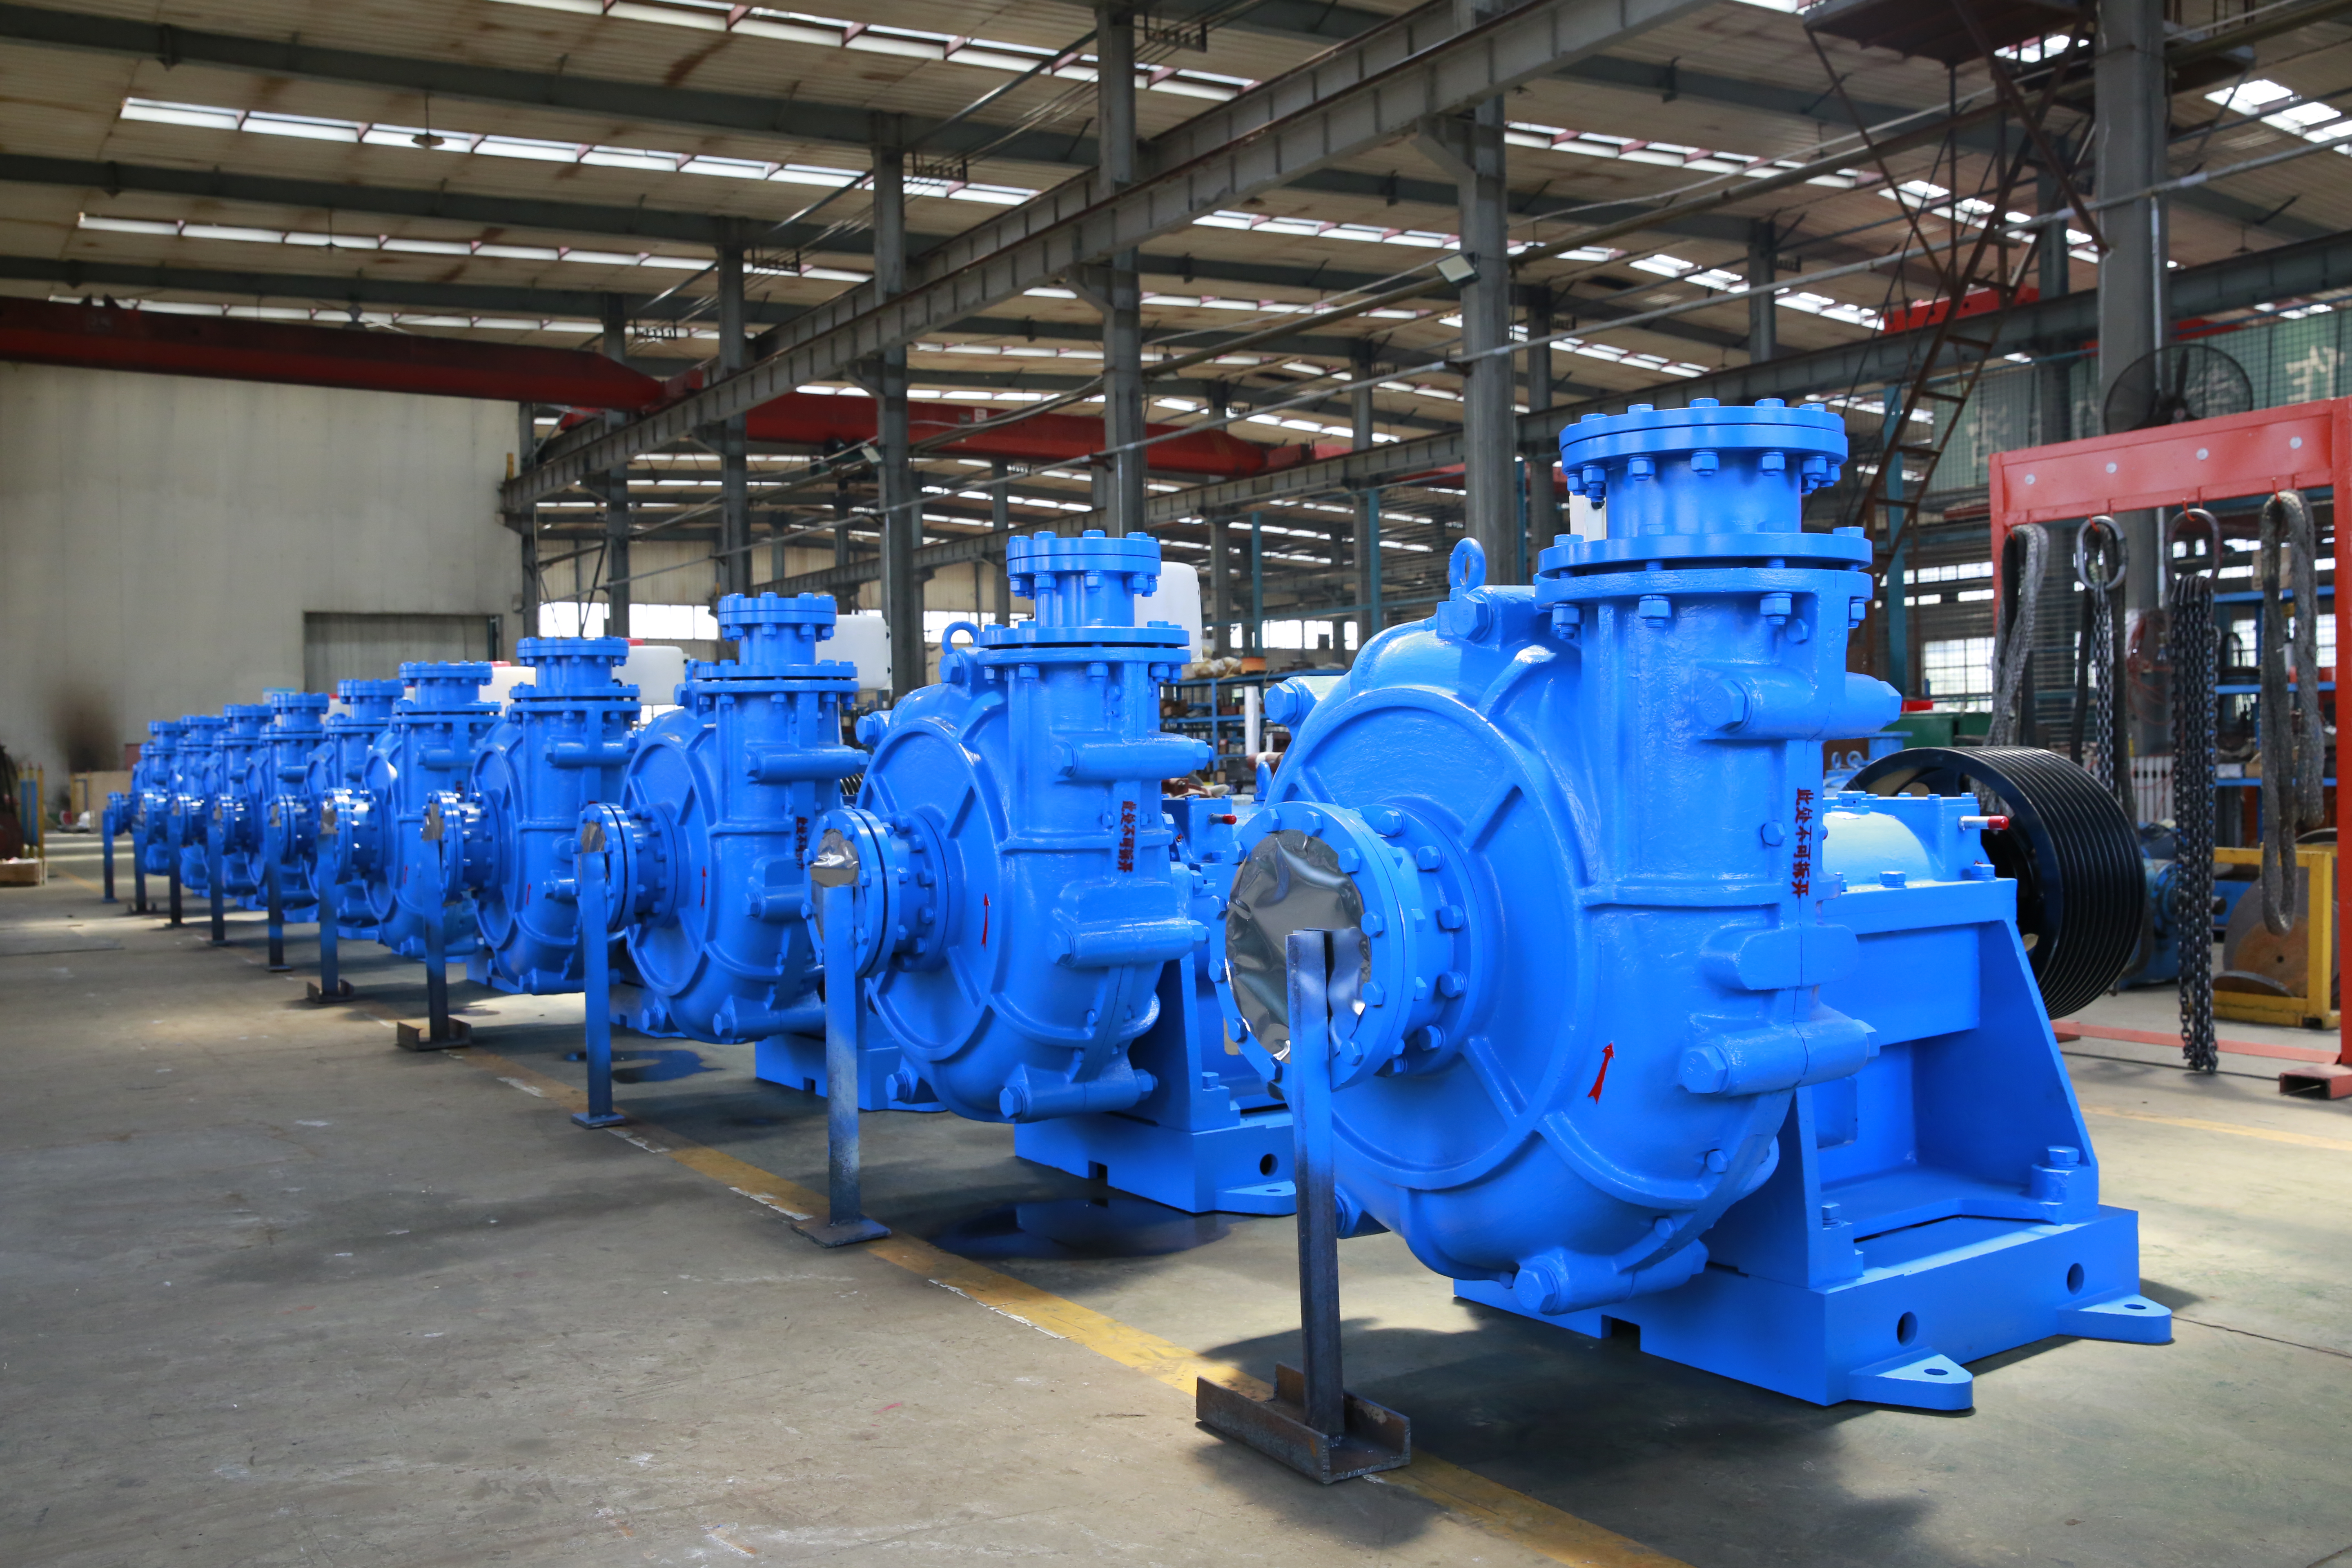 Shandong Zhanggu ceramic slurry pump, made of high temperature sintering special ceramic materials, has been successfully conquered and used for...